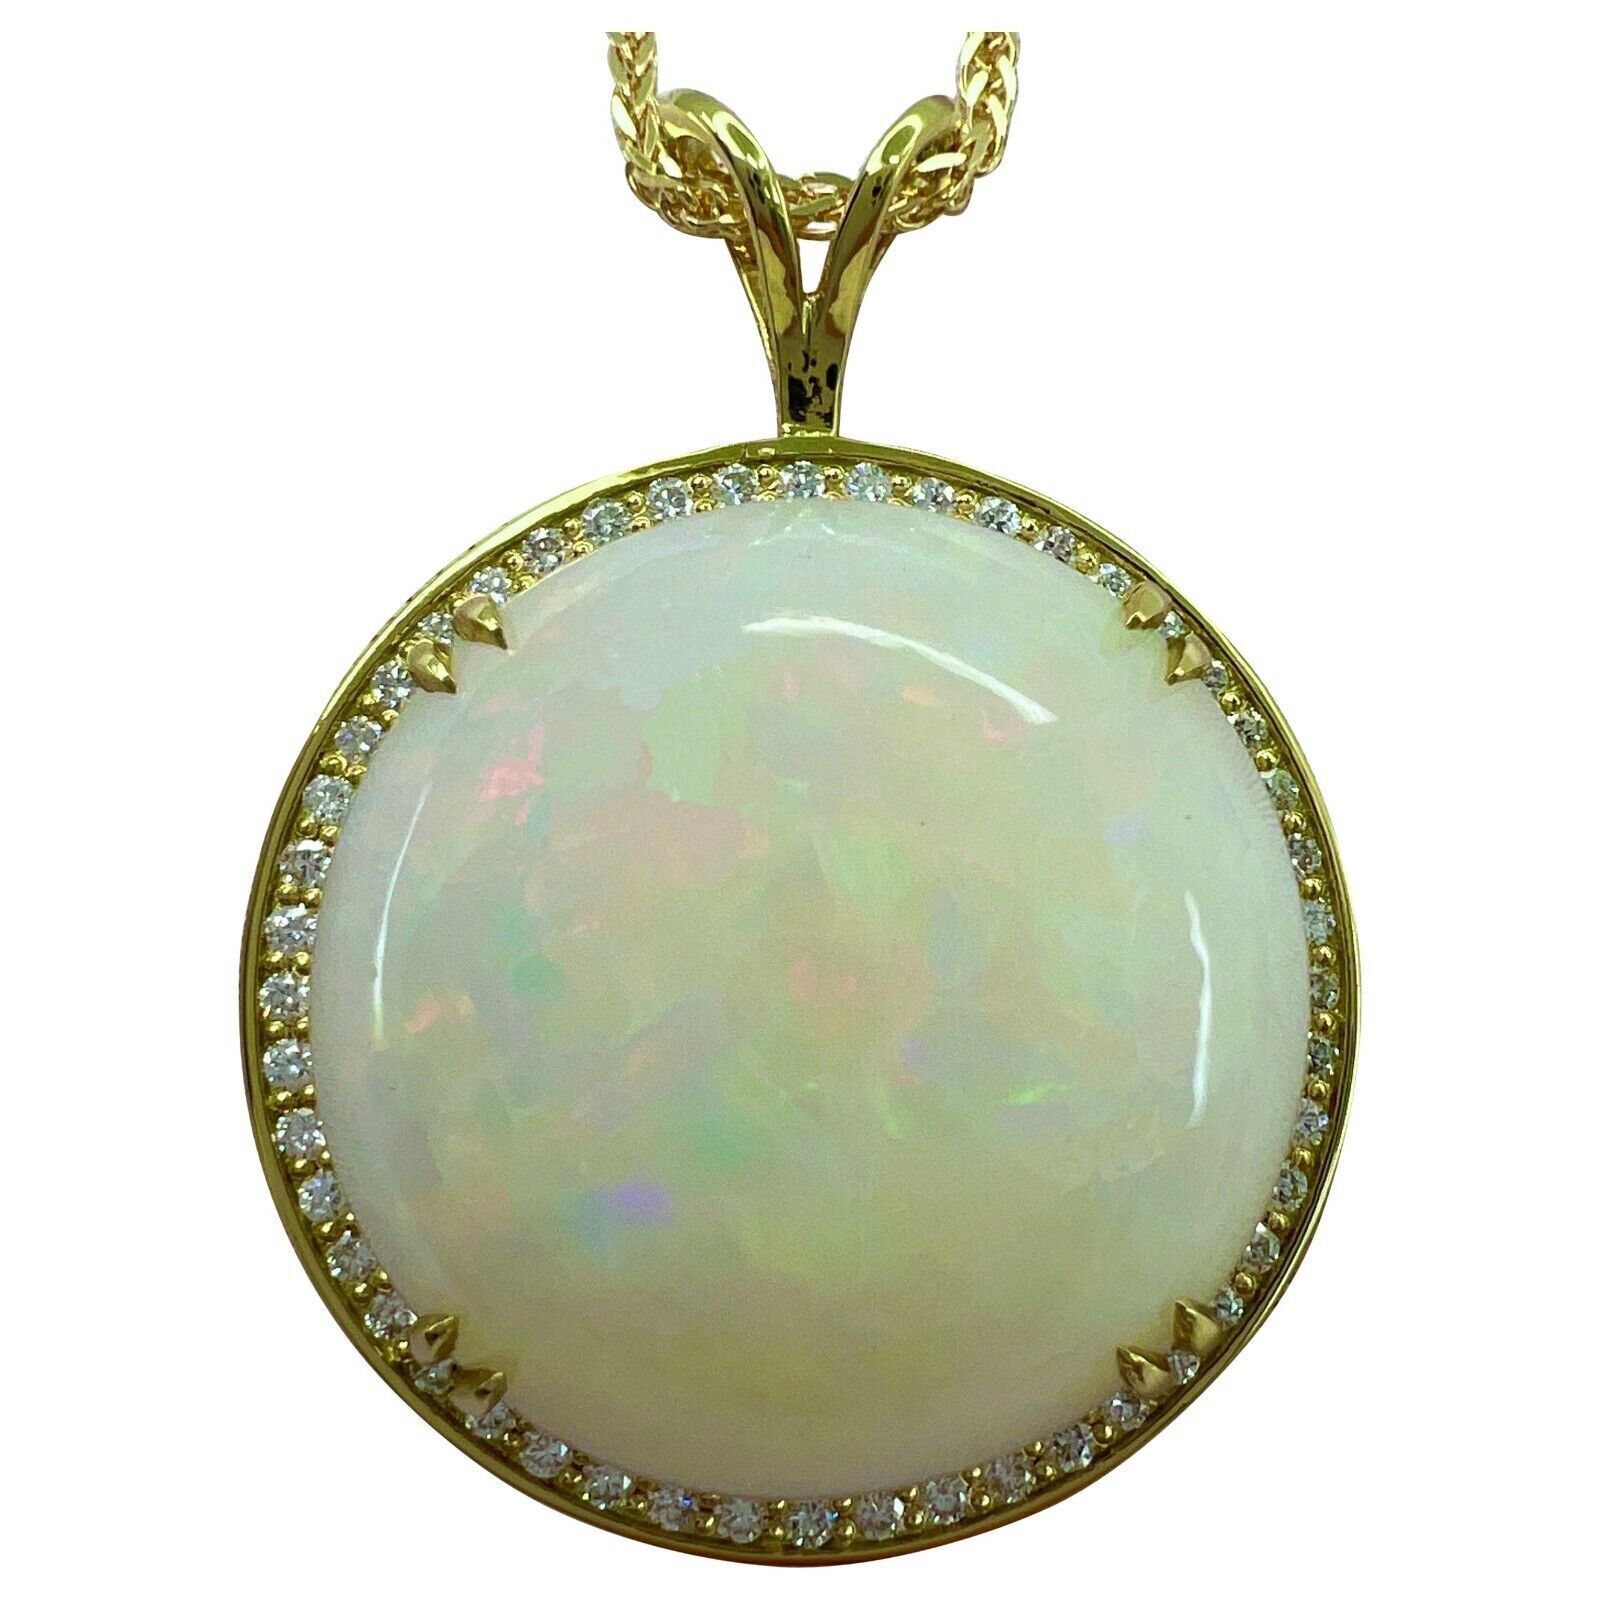 18ct White Gold Ethiopian Opal Necklace